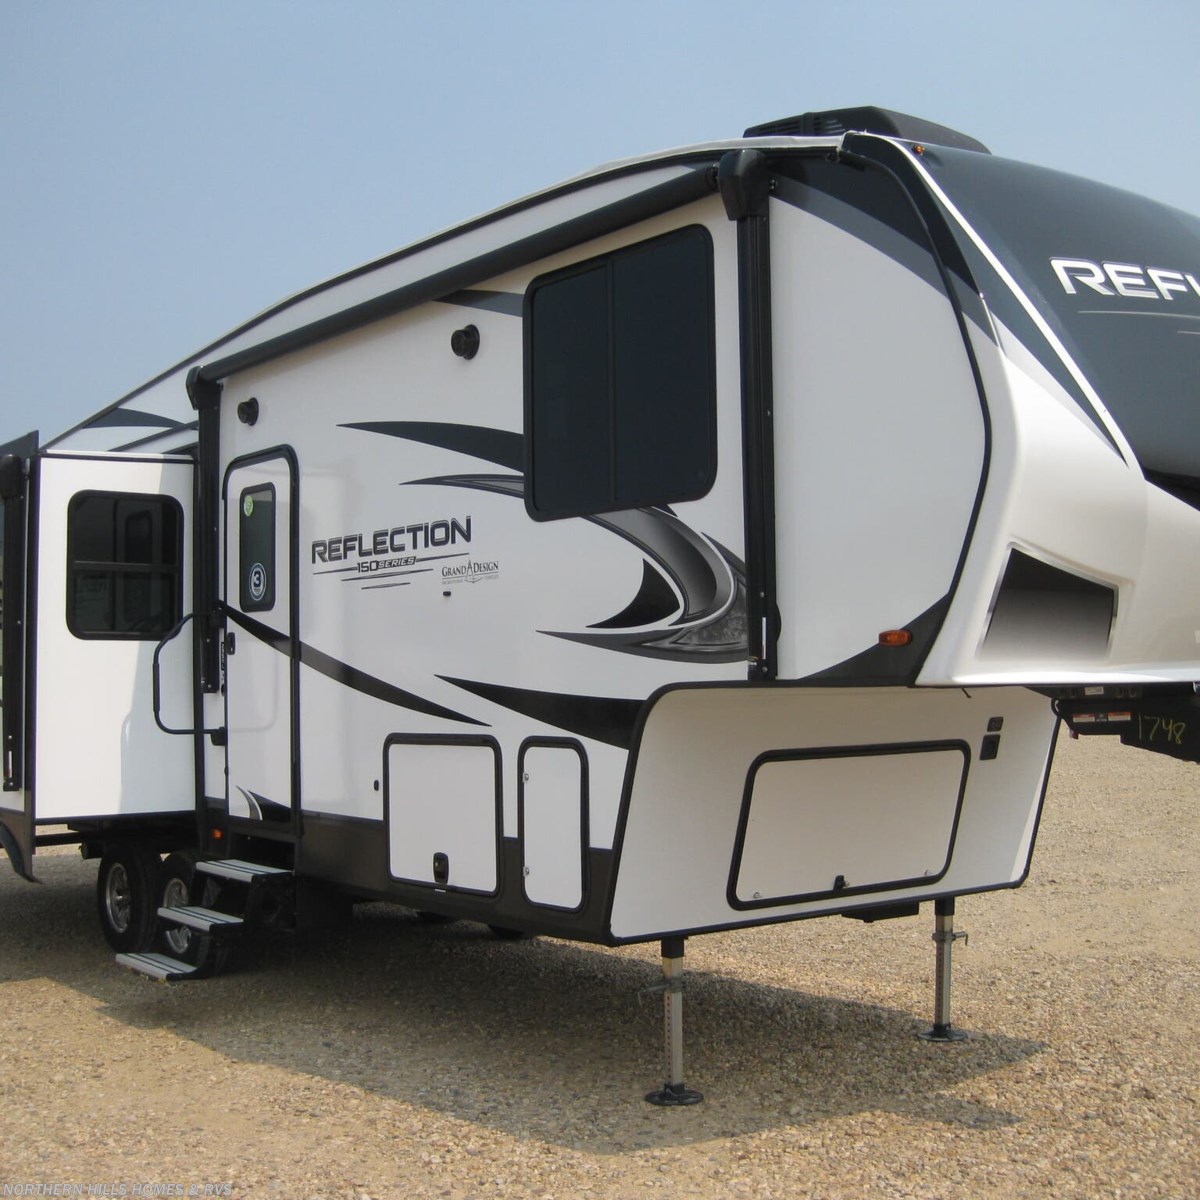 Gd21r 21 Grand Design Reflection 150 Series 295rl Fifth Wheel For Sale In Whitewood Sd